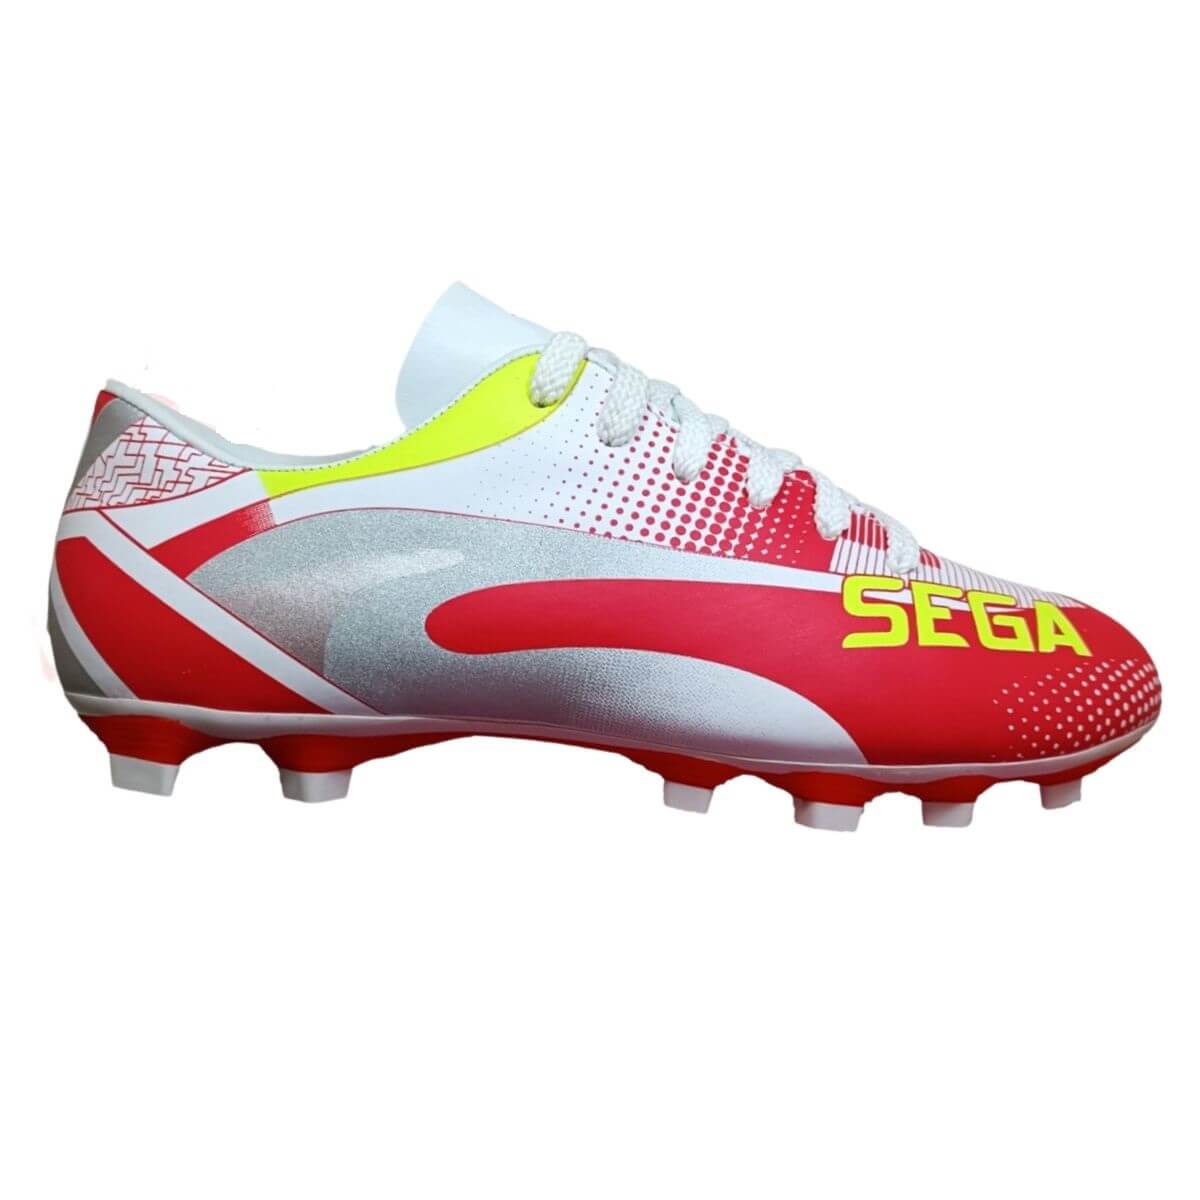 Men's Soccer Shoes Outdoor Athletics Training Football Boots Teenagers  Cleats Spikes Shoes AG/FG - Walmart.com